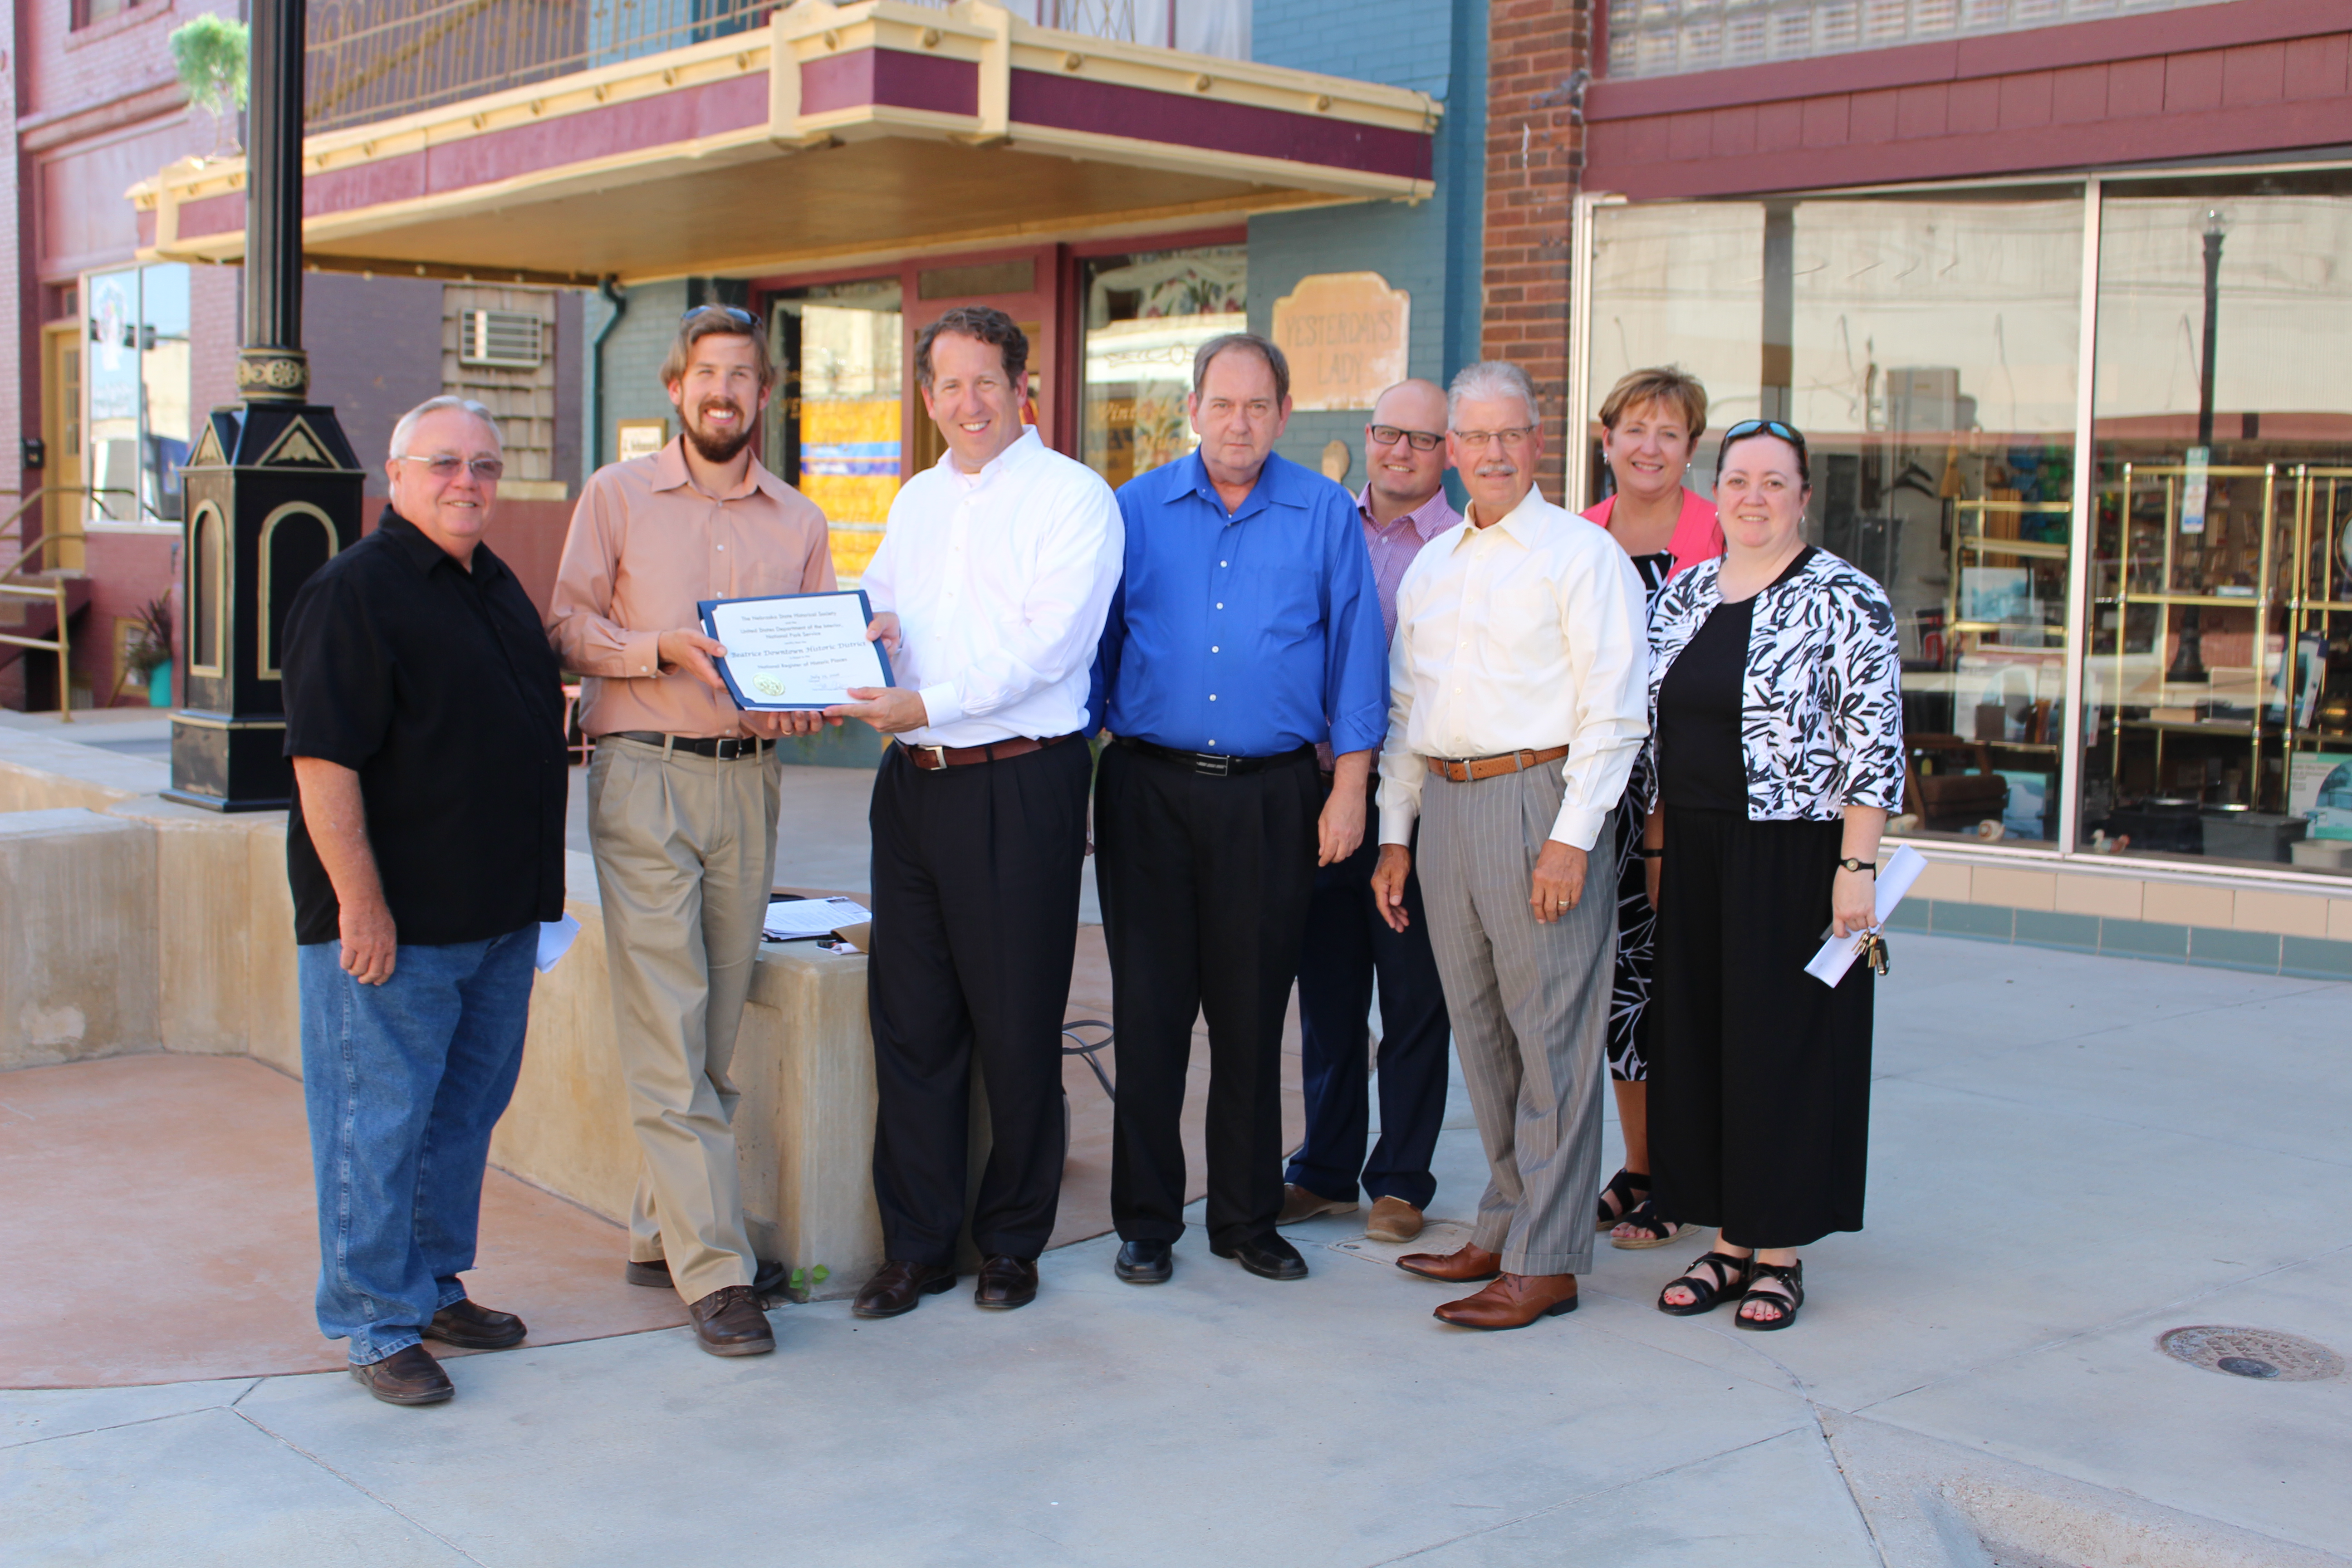 Downtown Beatrice named to NRHP